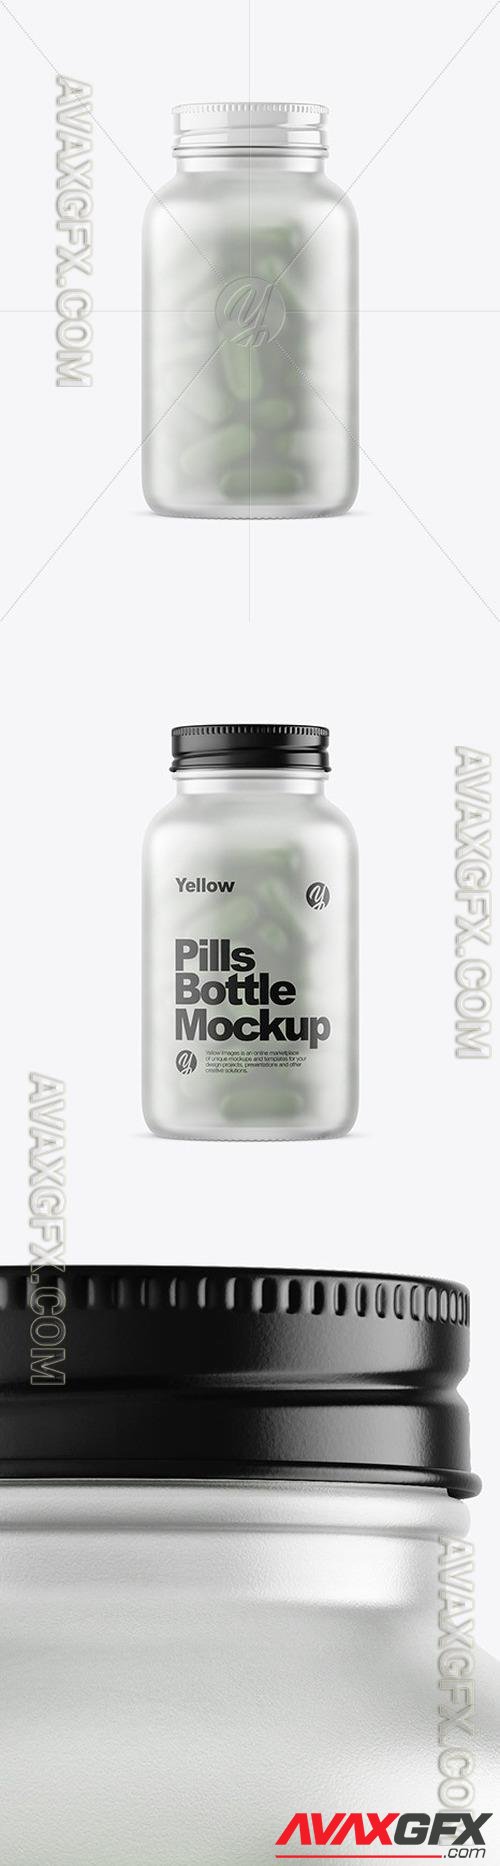 Frosted Glass Bottle With Pills Mockup 51642 TIF